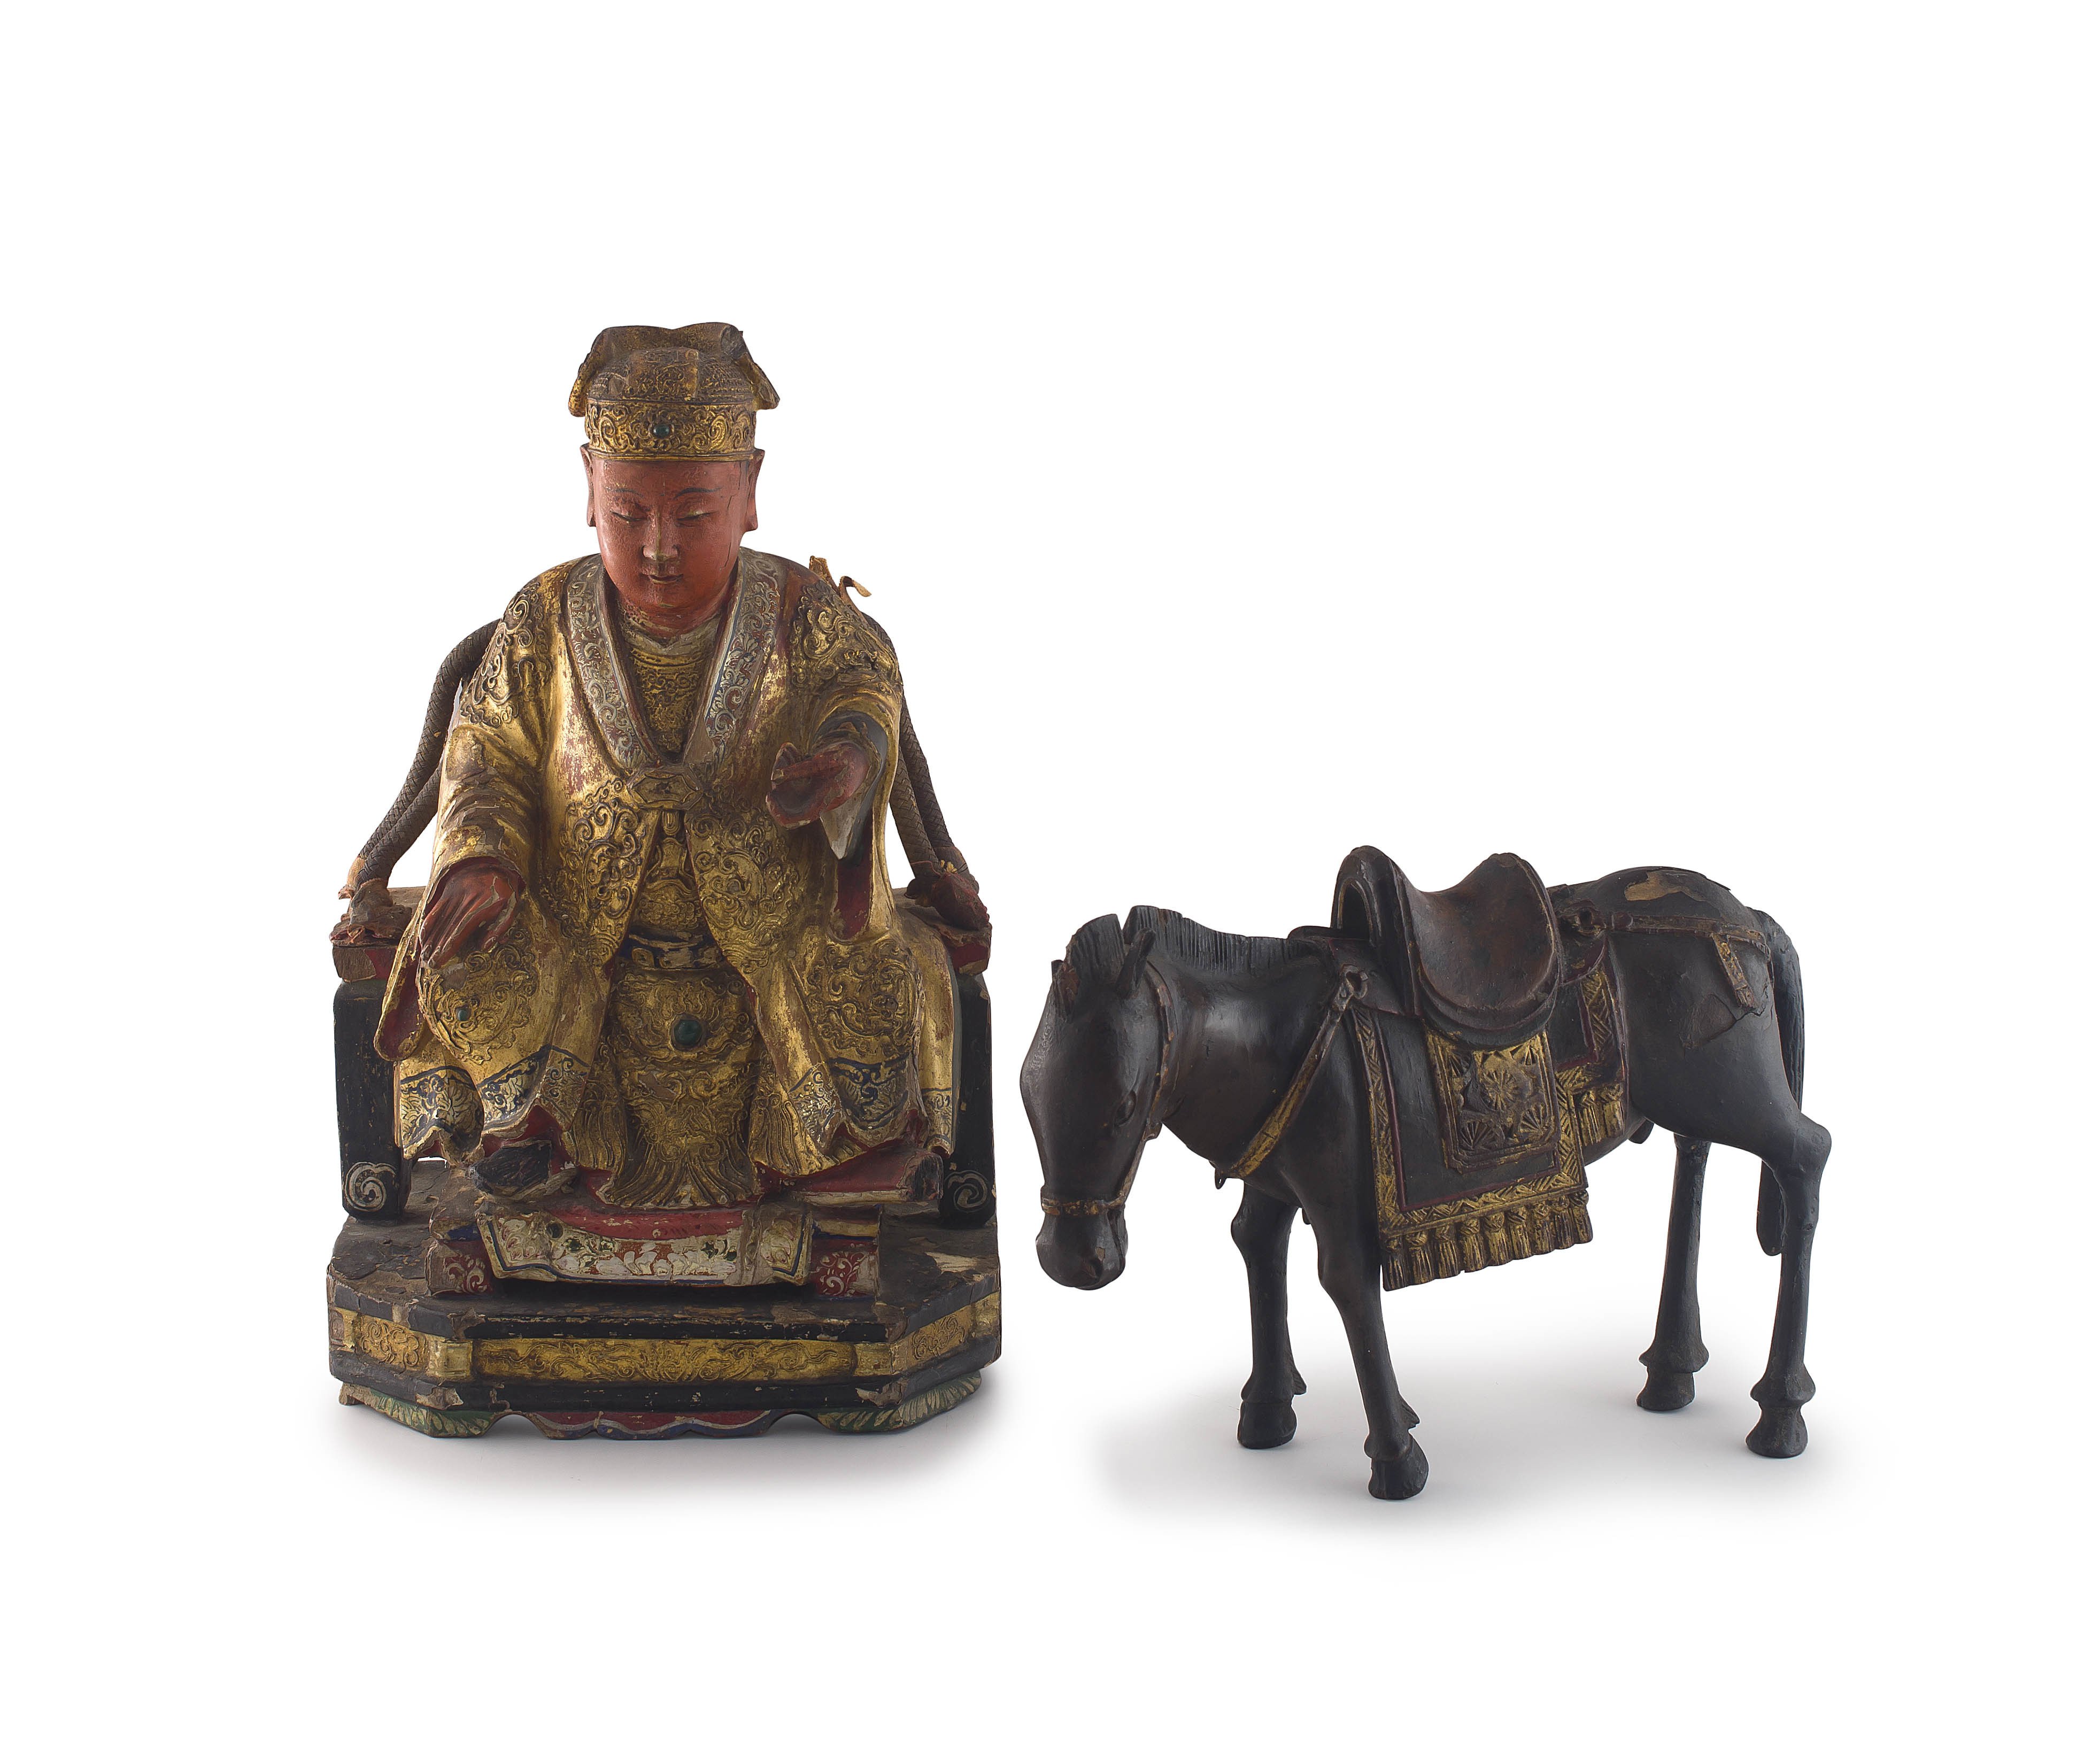 A Chinese wood and gilt-lacquer figure of a courtier, Qing Dynasty, 18th century